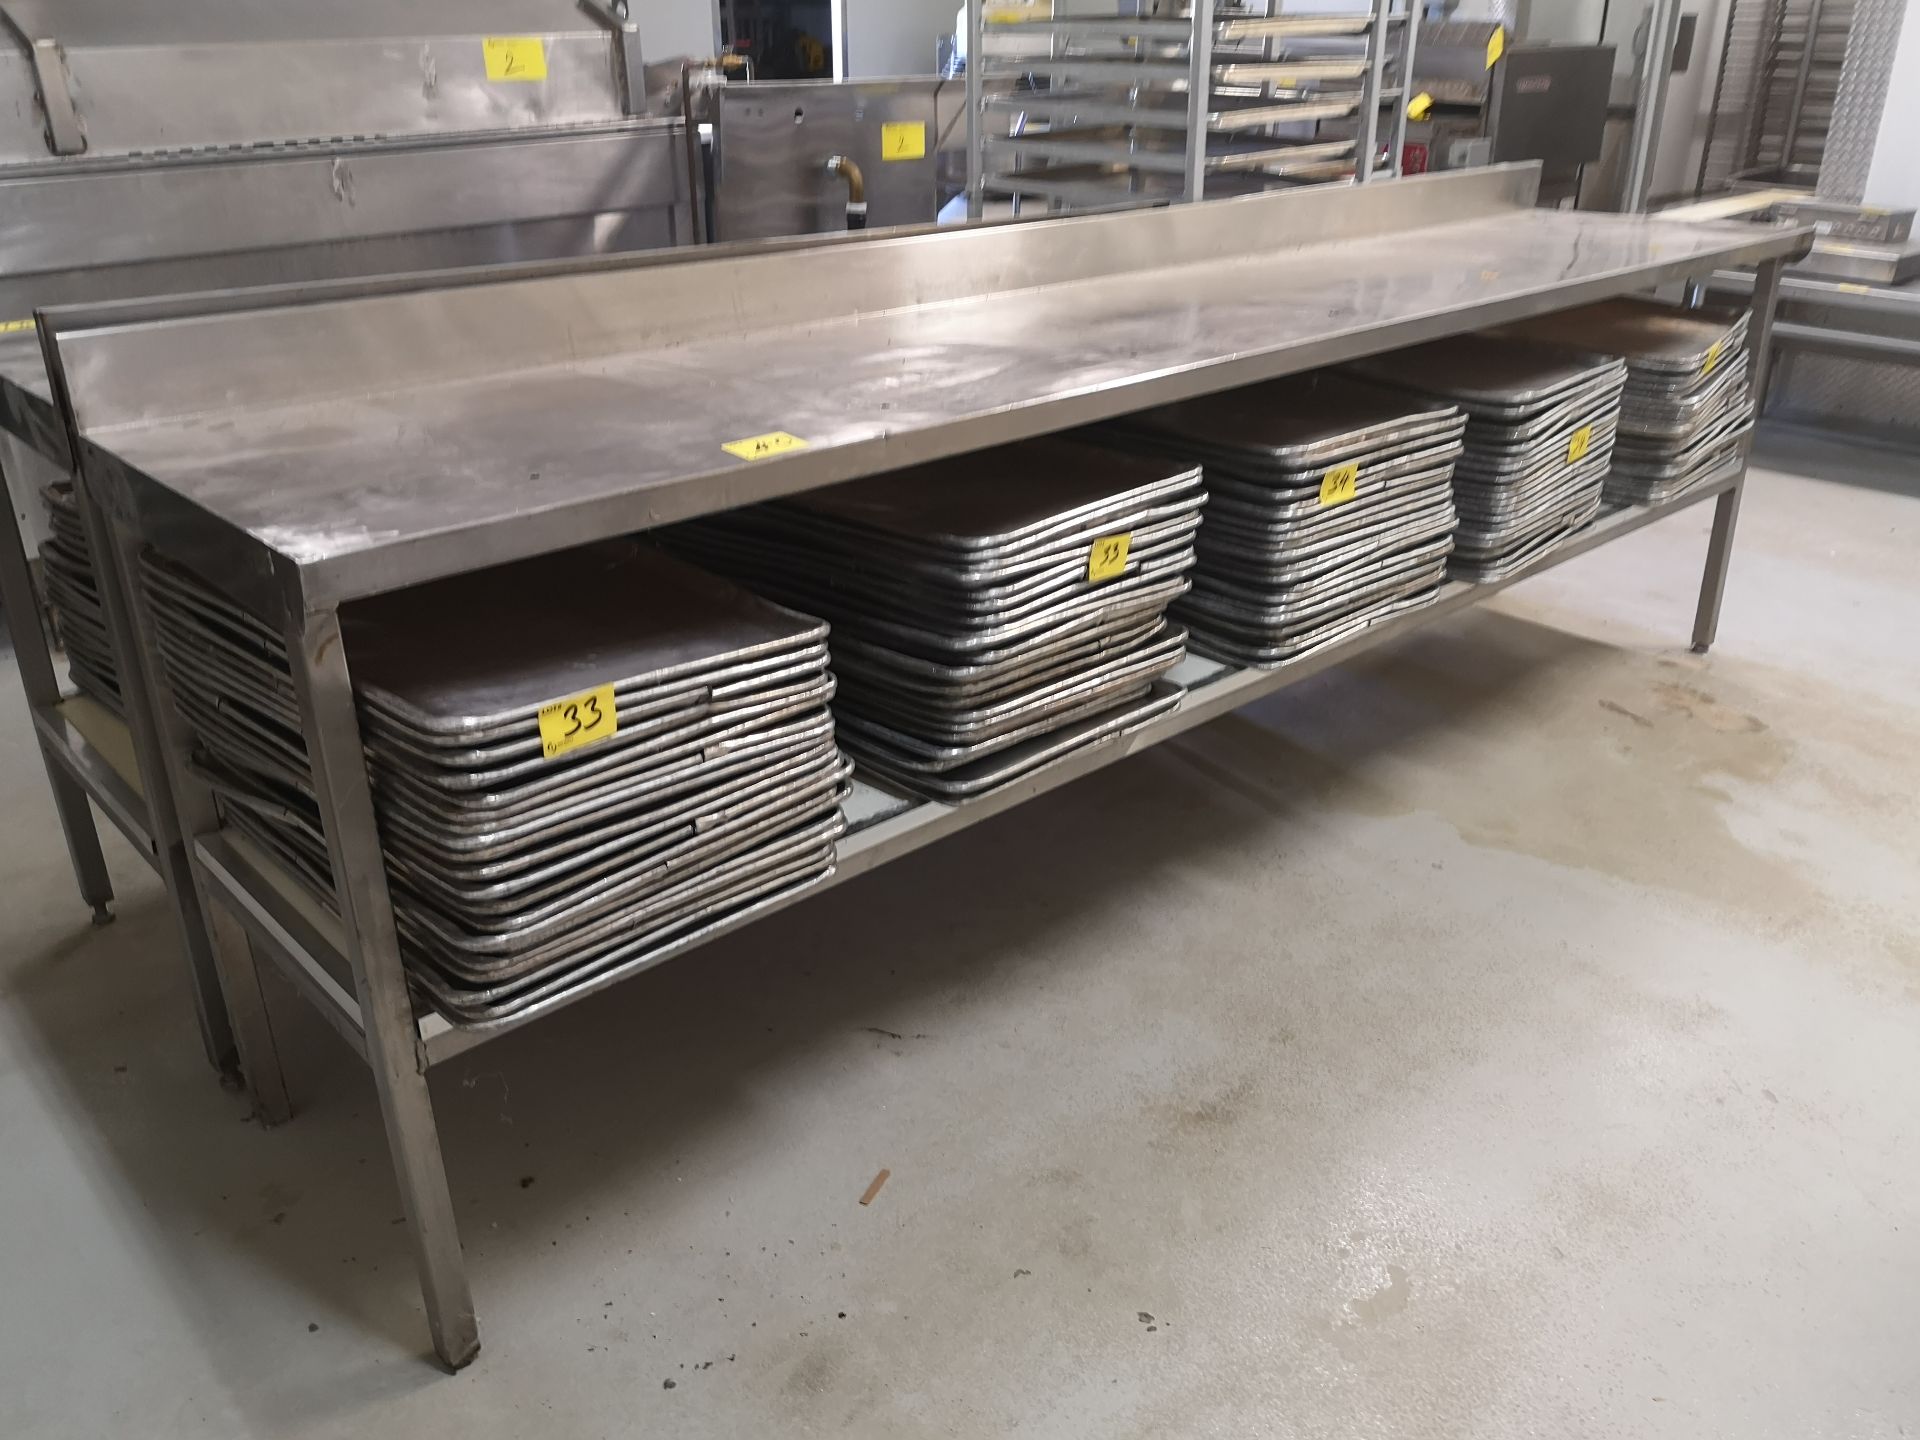 10' X 24" X 36" STAINLESS STEEL PREP TABLE